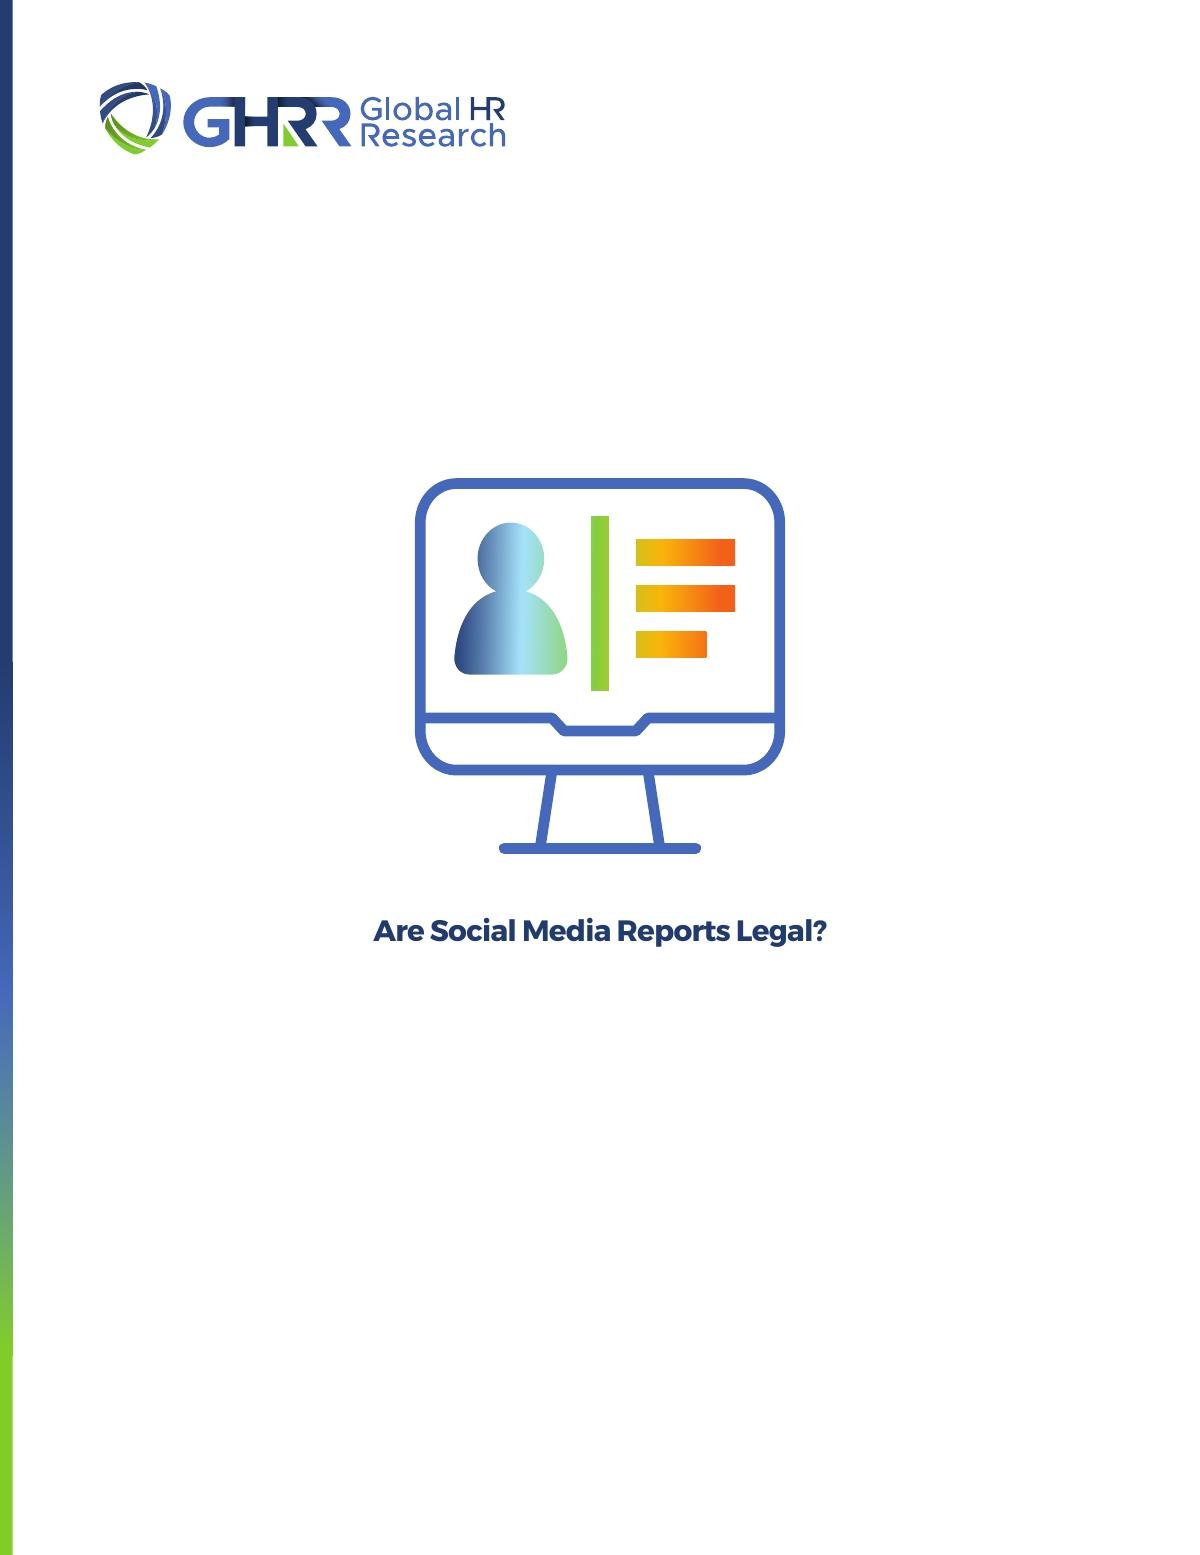 Are Social Media Reports Legal?